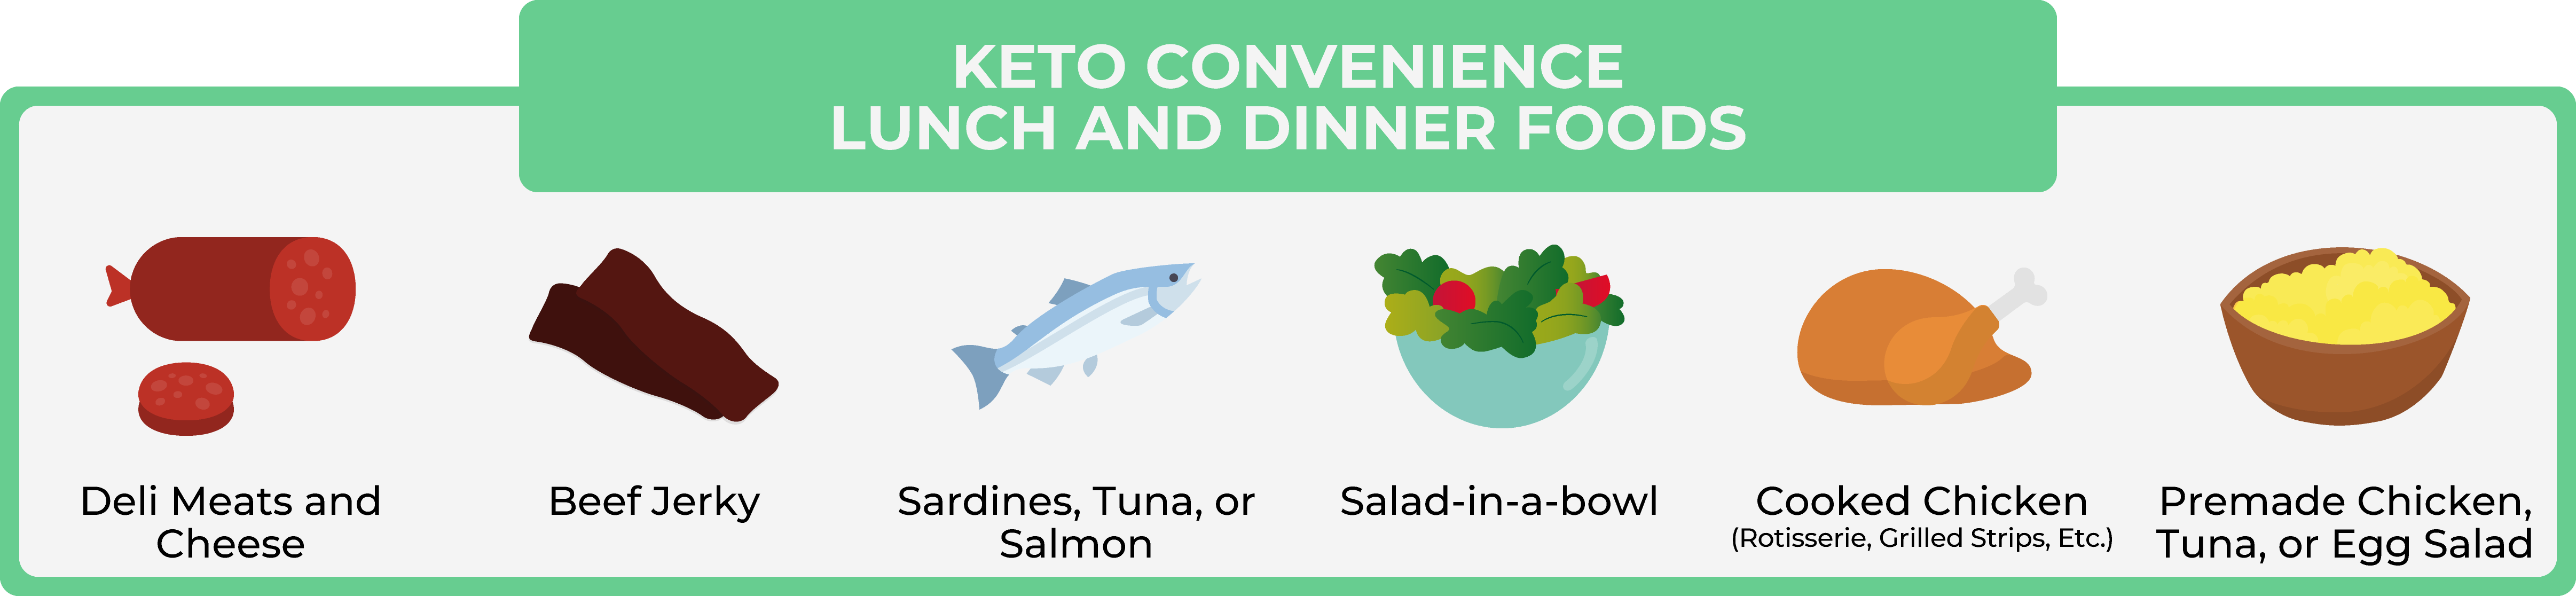 keto-convenience-lunch-and-dinner-foods.png